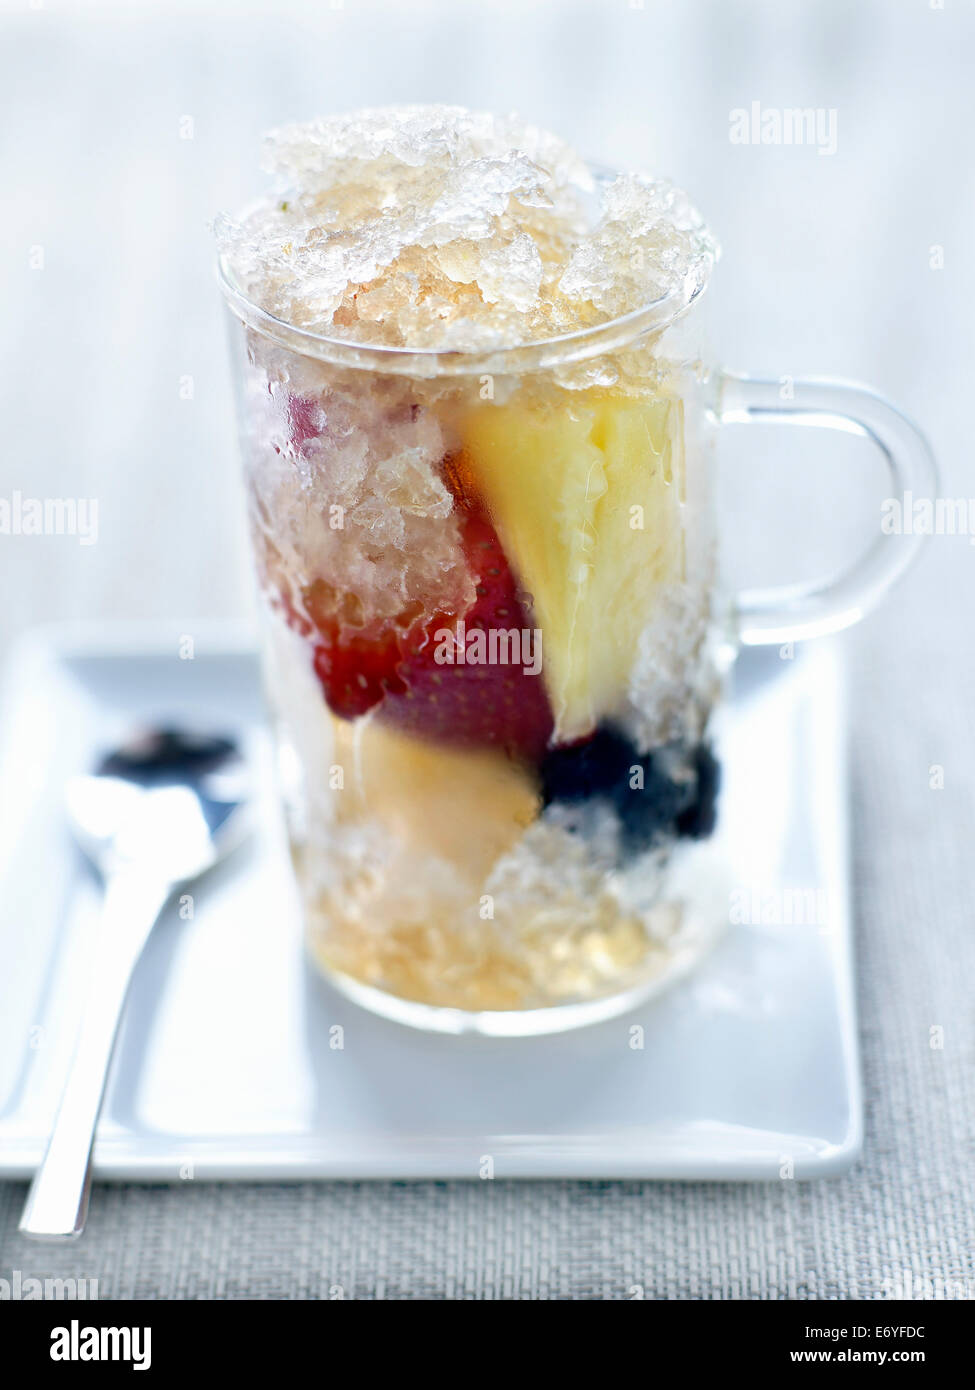 Fresh fruit salad with tea-flavored jelly Stock Photo